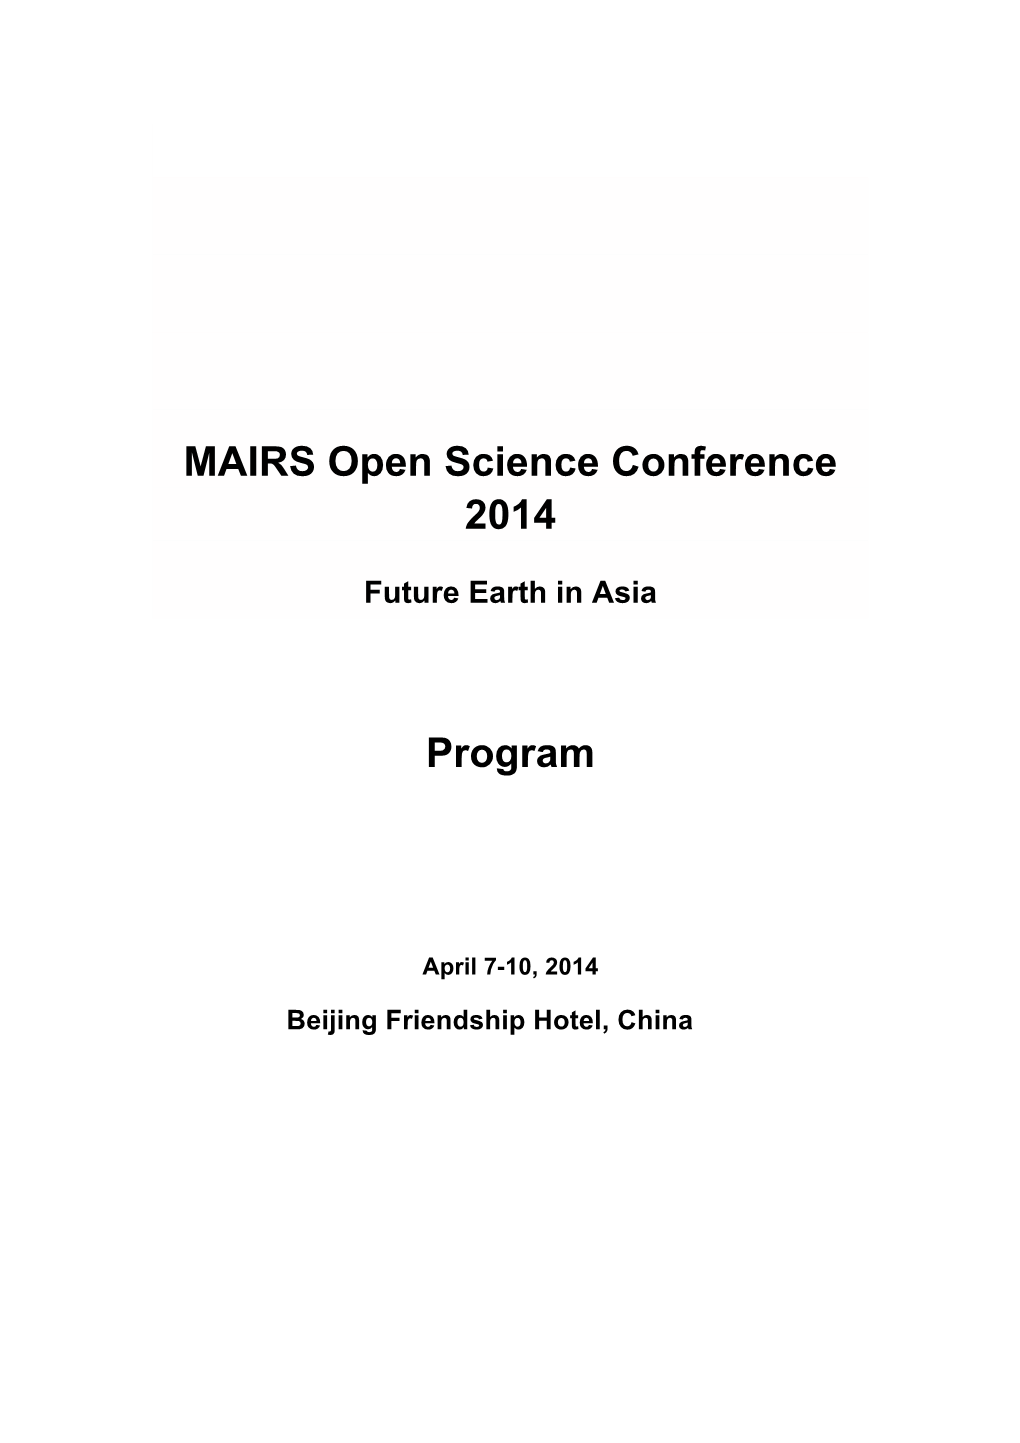 MAIRS Open Science Conference 2014 Program